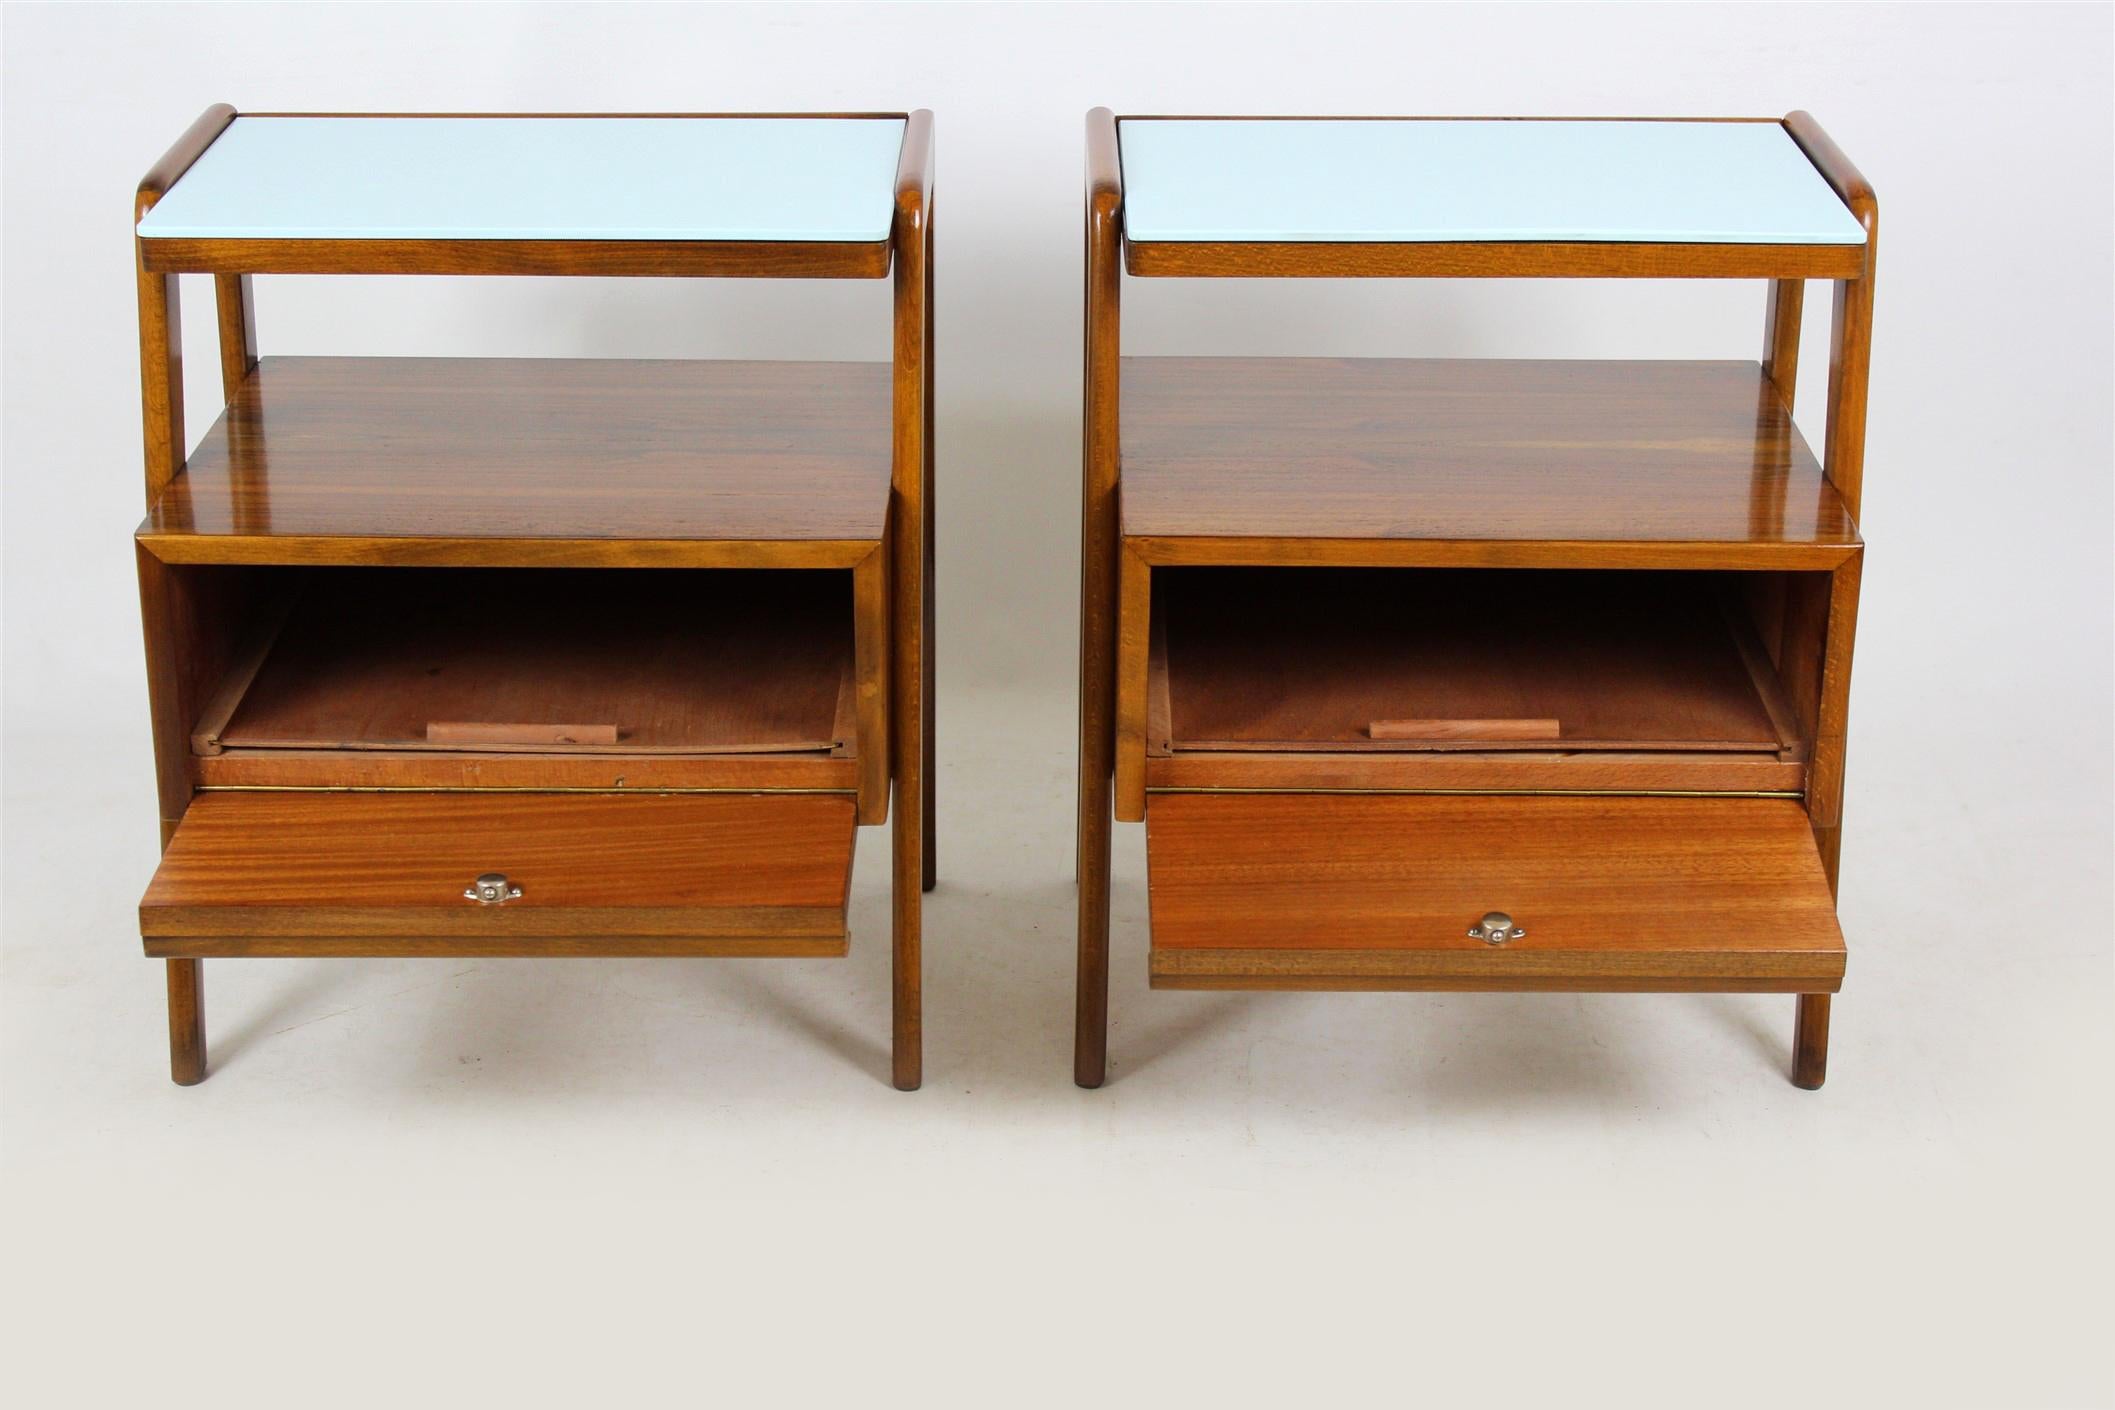 20th Century Midcentury Nightstands with Blue Glass Tops from Jitona, 1960s, Set of Two